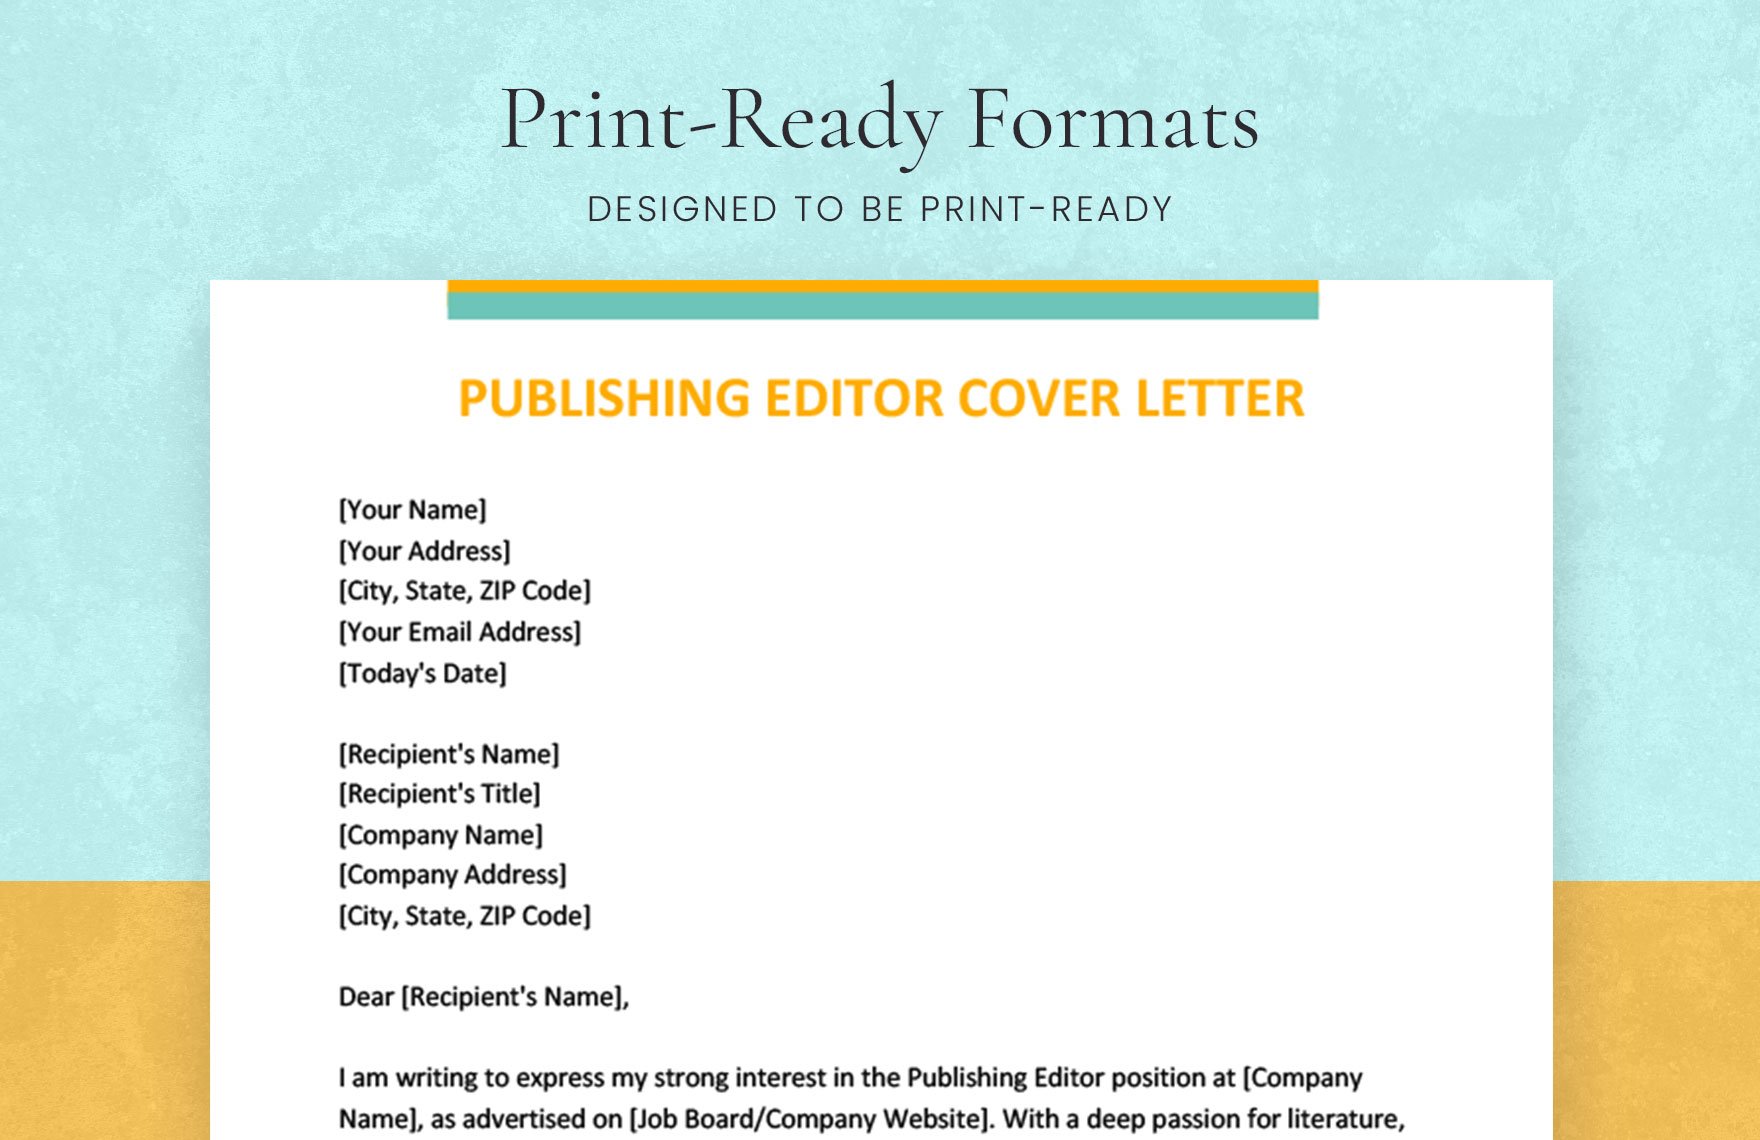 Publishing Editor Cover Letter